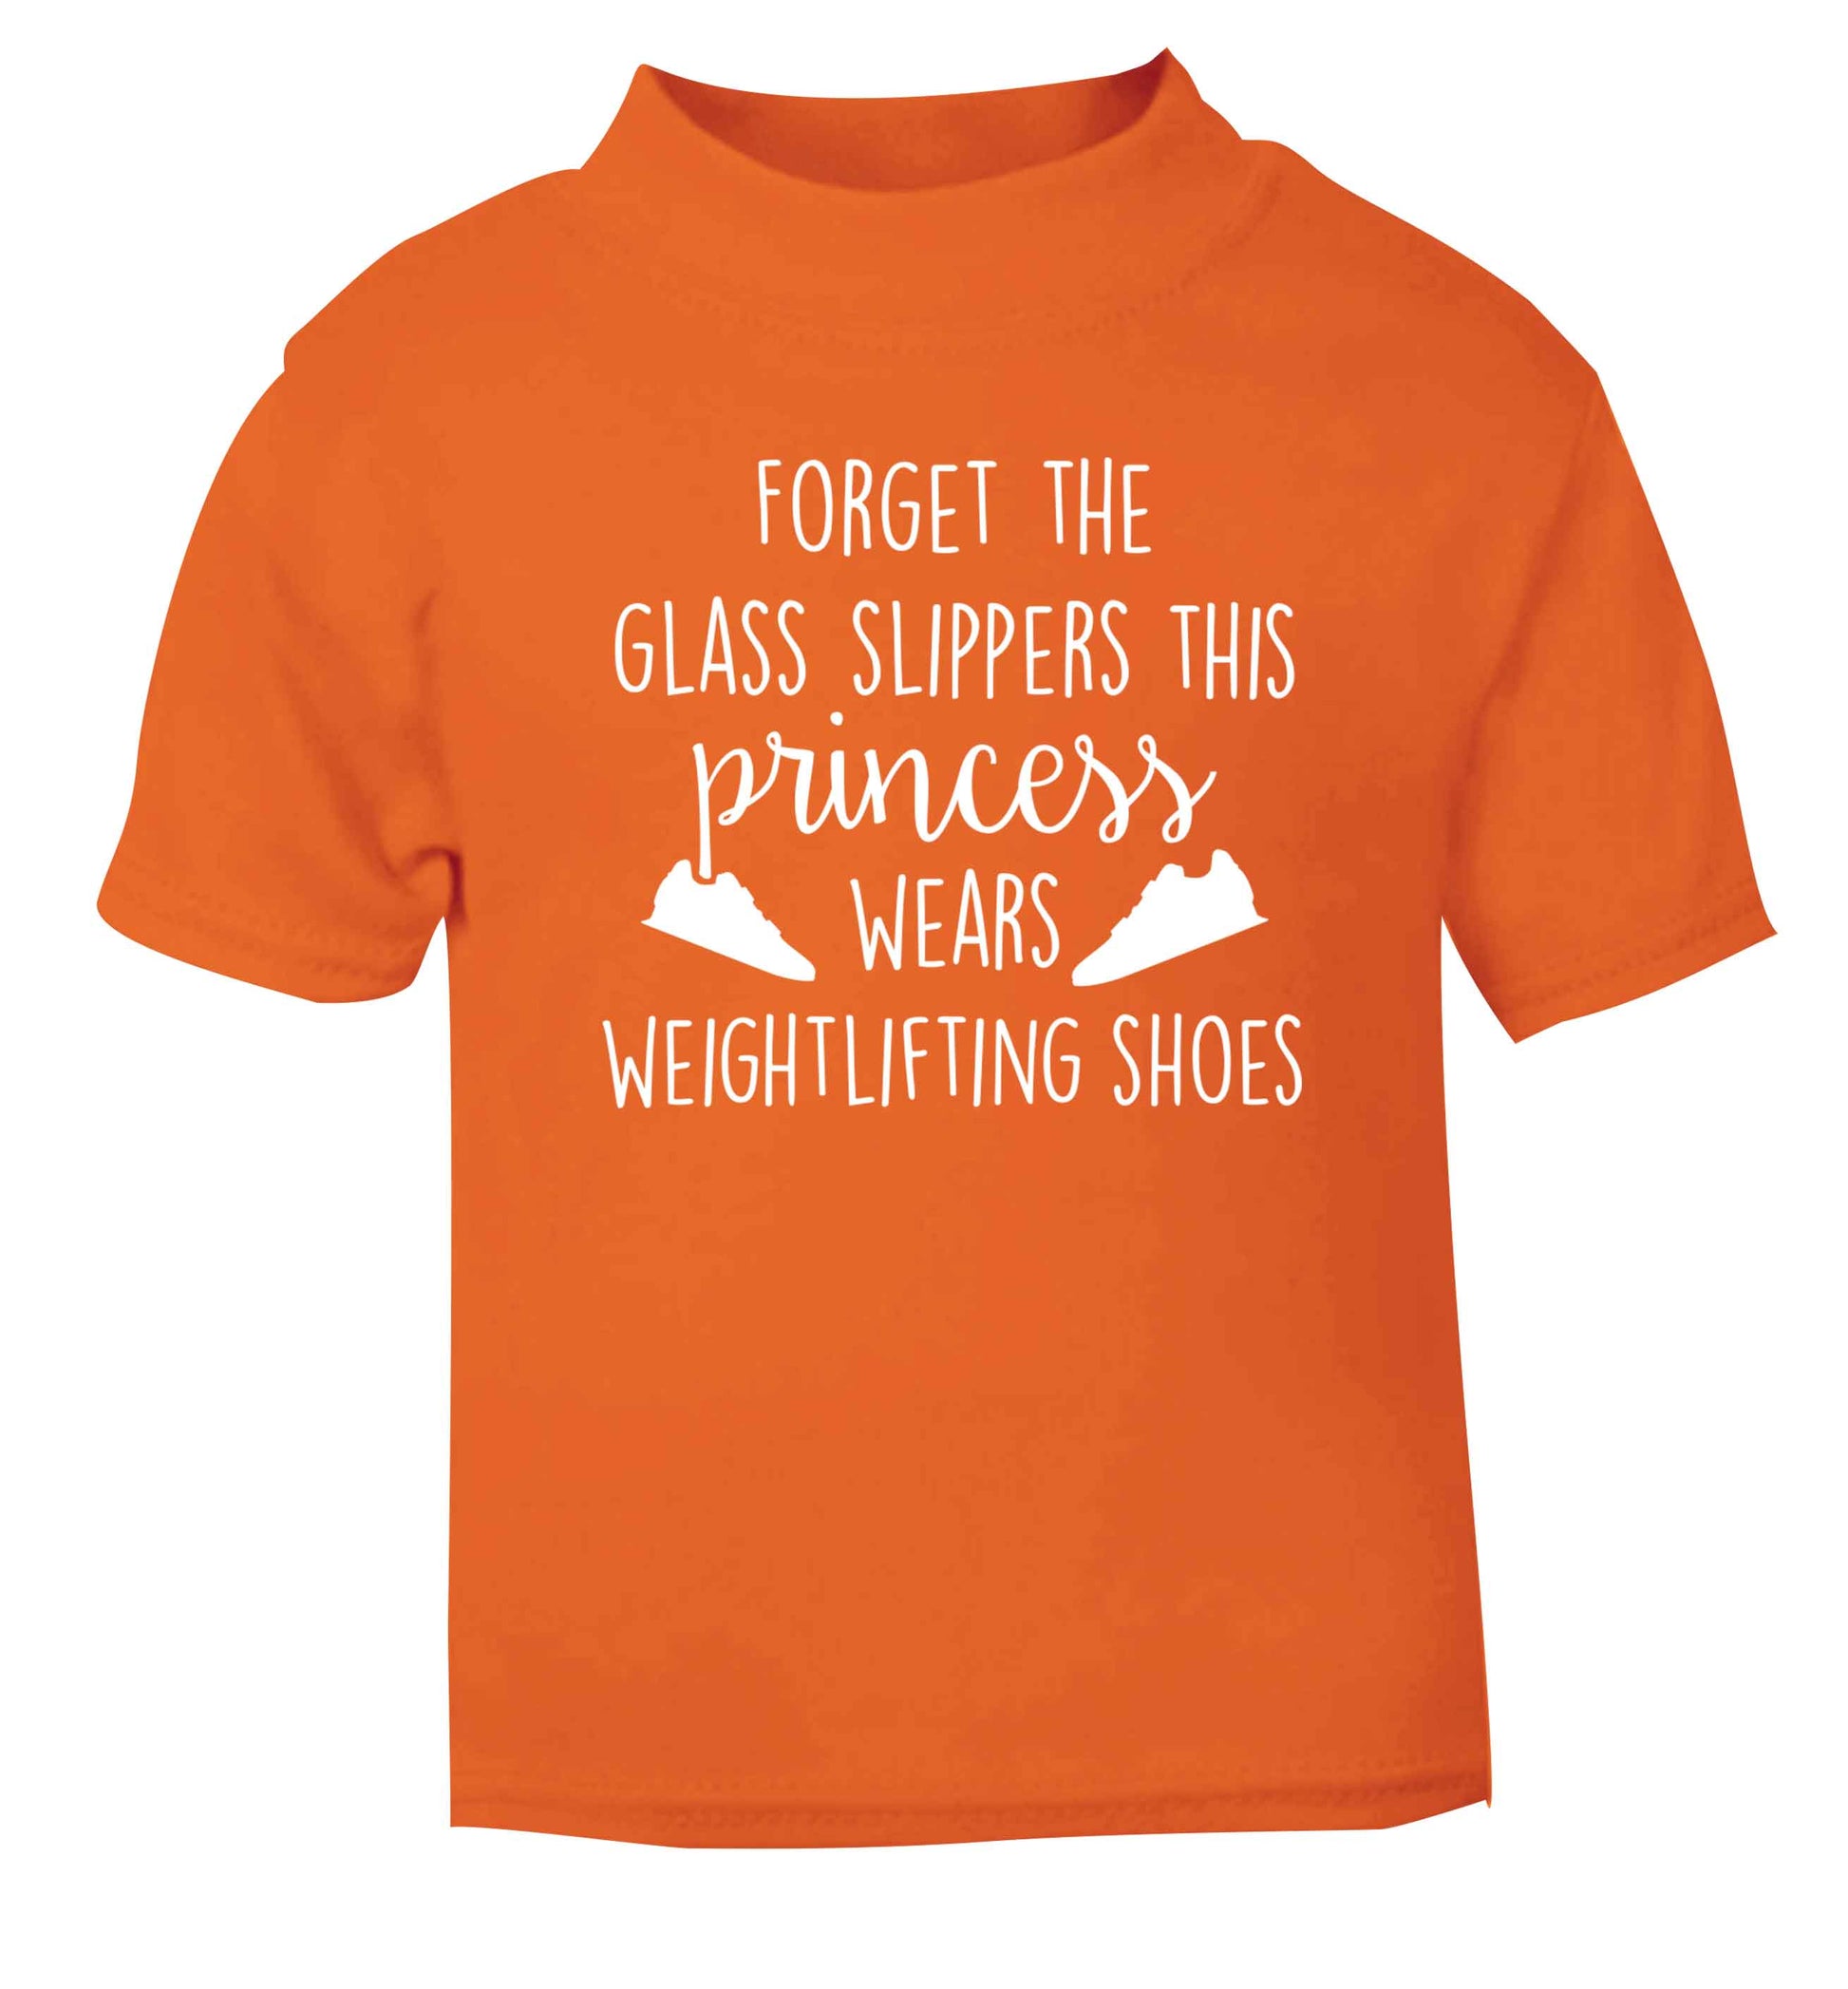 Forget the glass slippers this princess wears weightlifting shoes orange Baby Toddler Tshirt 2 Years